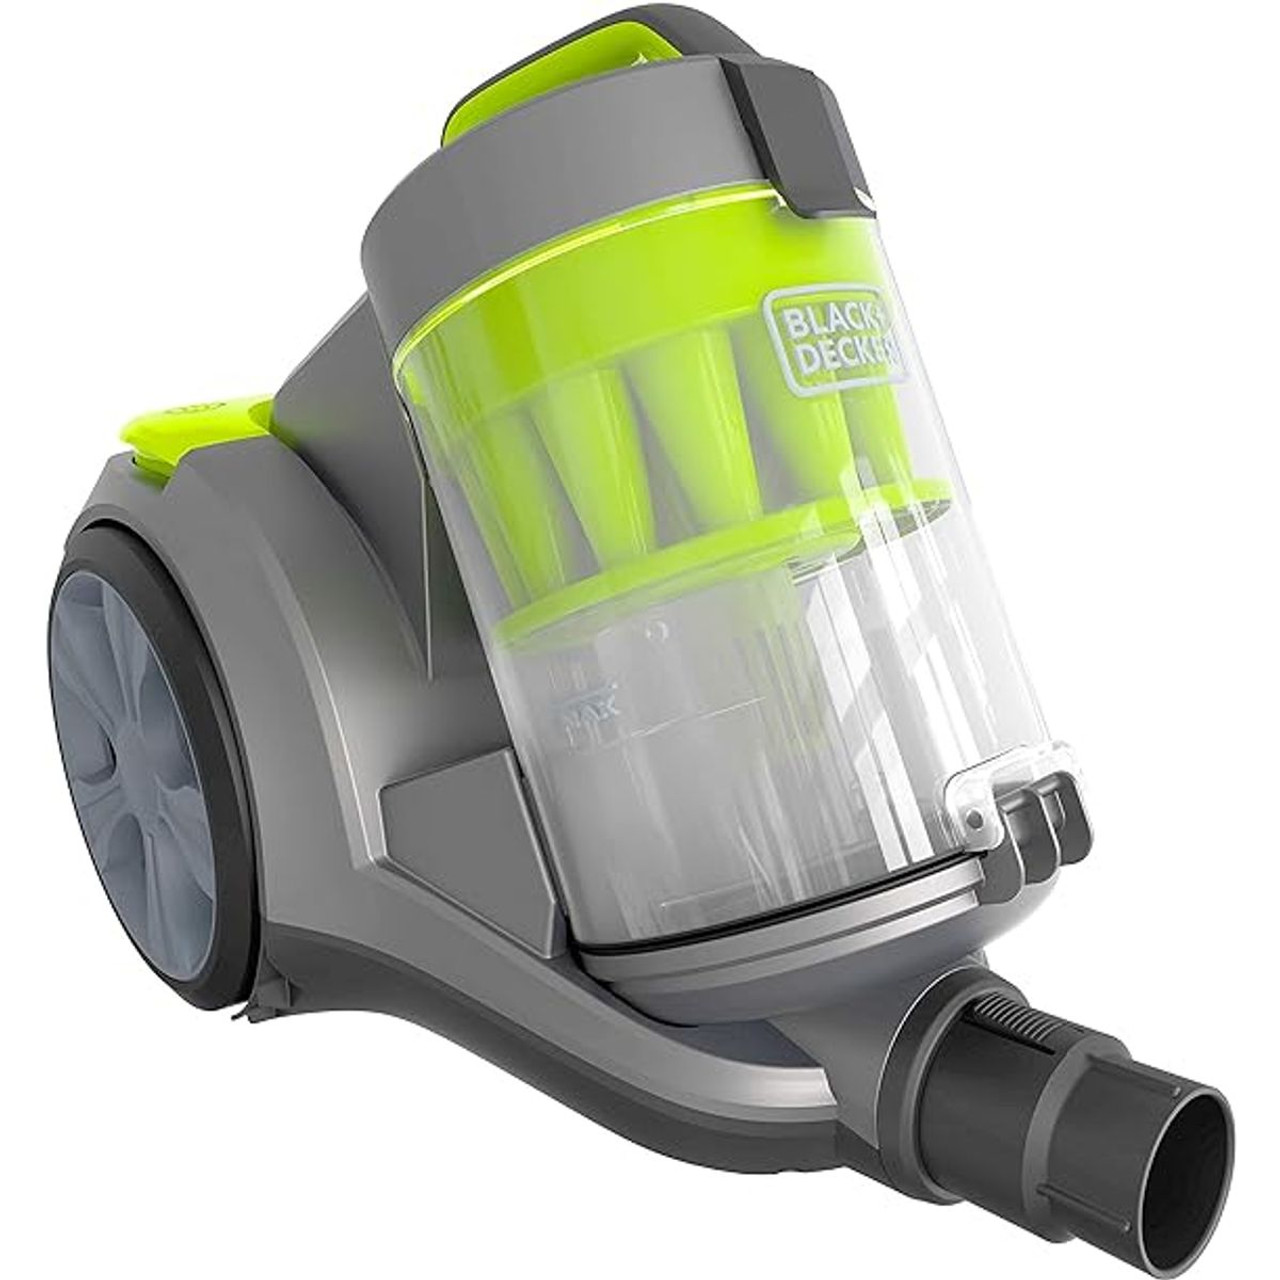 BLACK+DECKER Bagless Canister Multi-Cyclonic Vacuum - Gray/Green product image